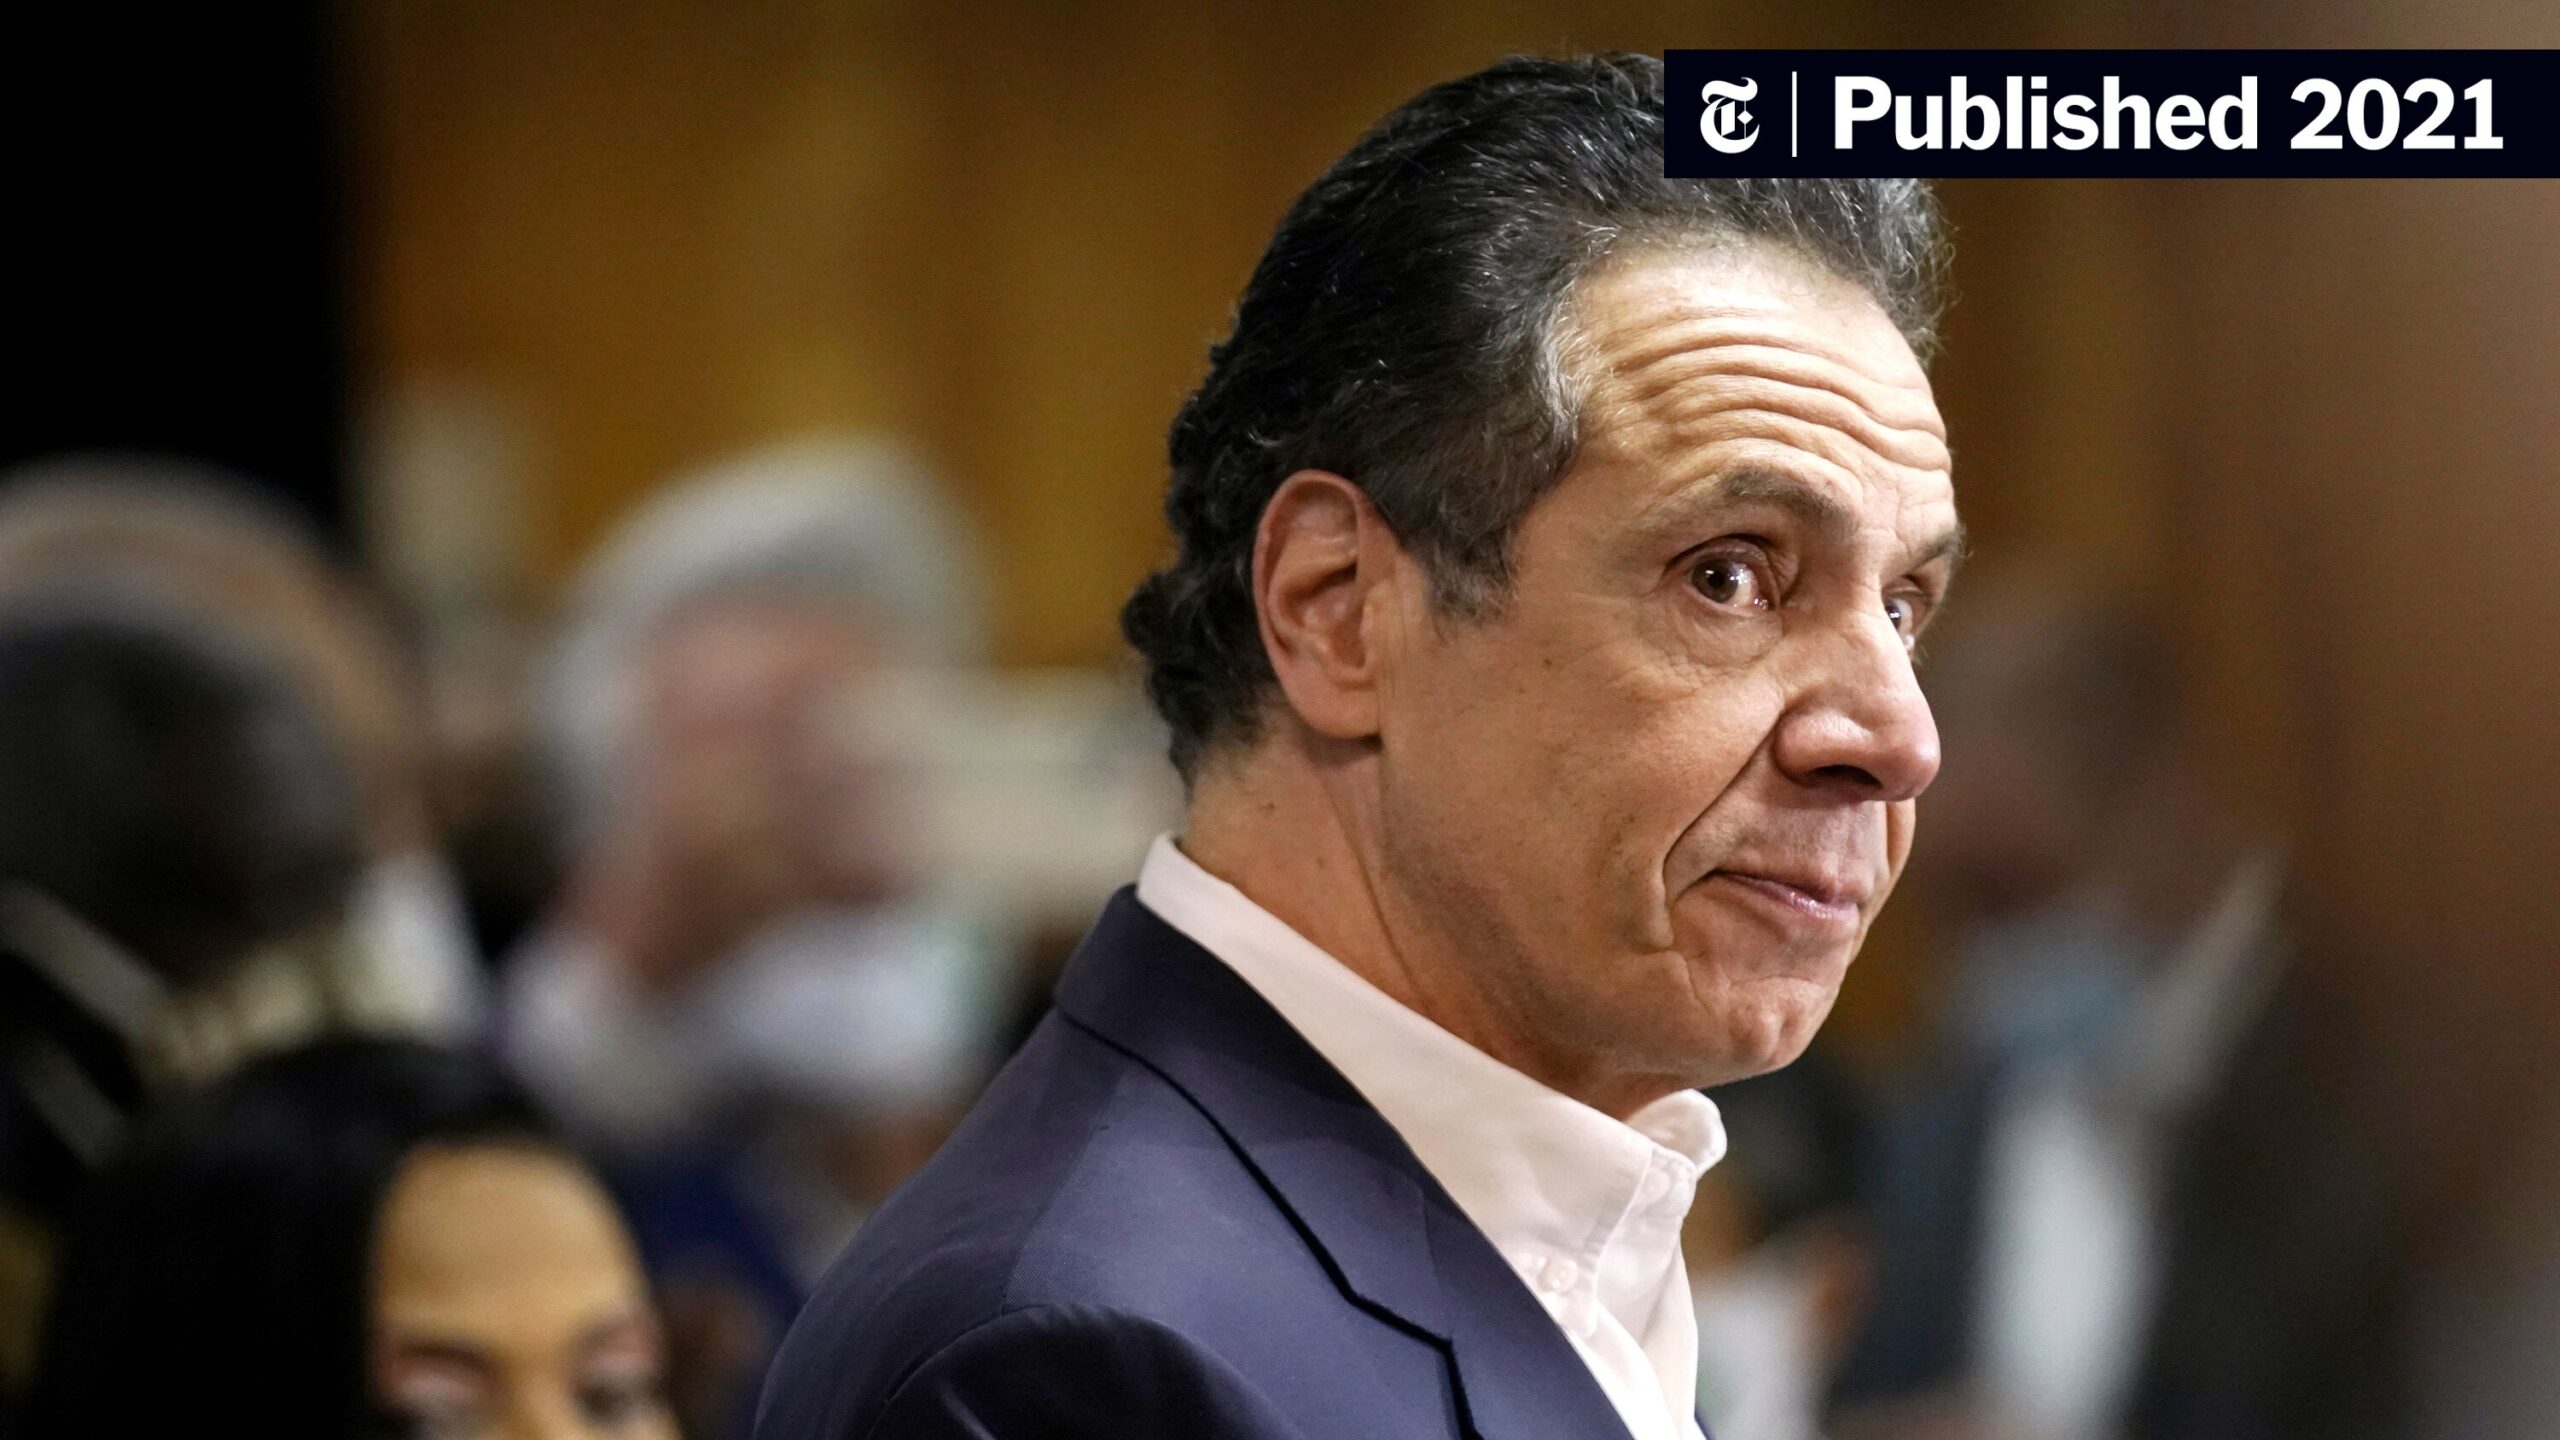 What Makes Cuomo So grabby